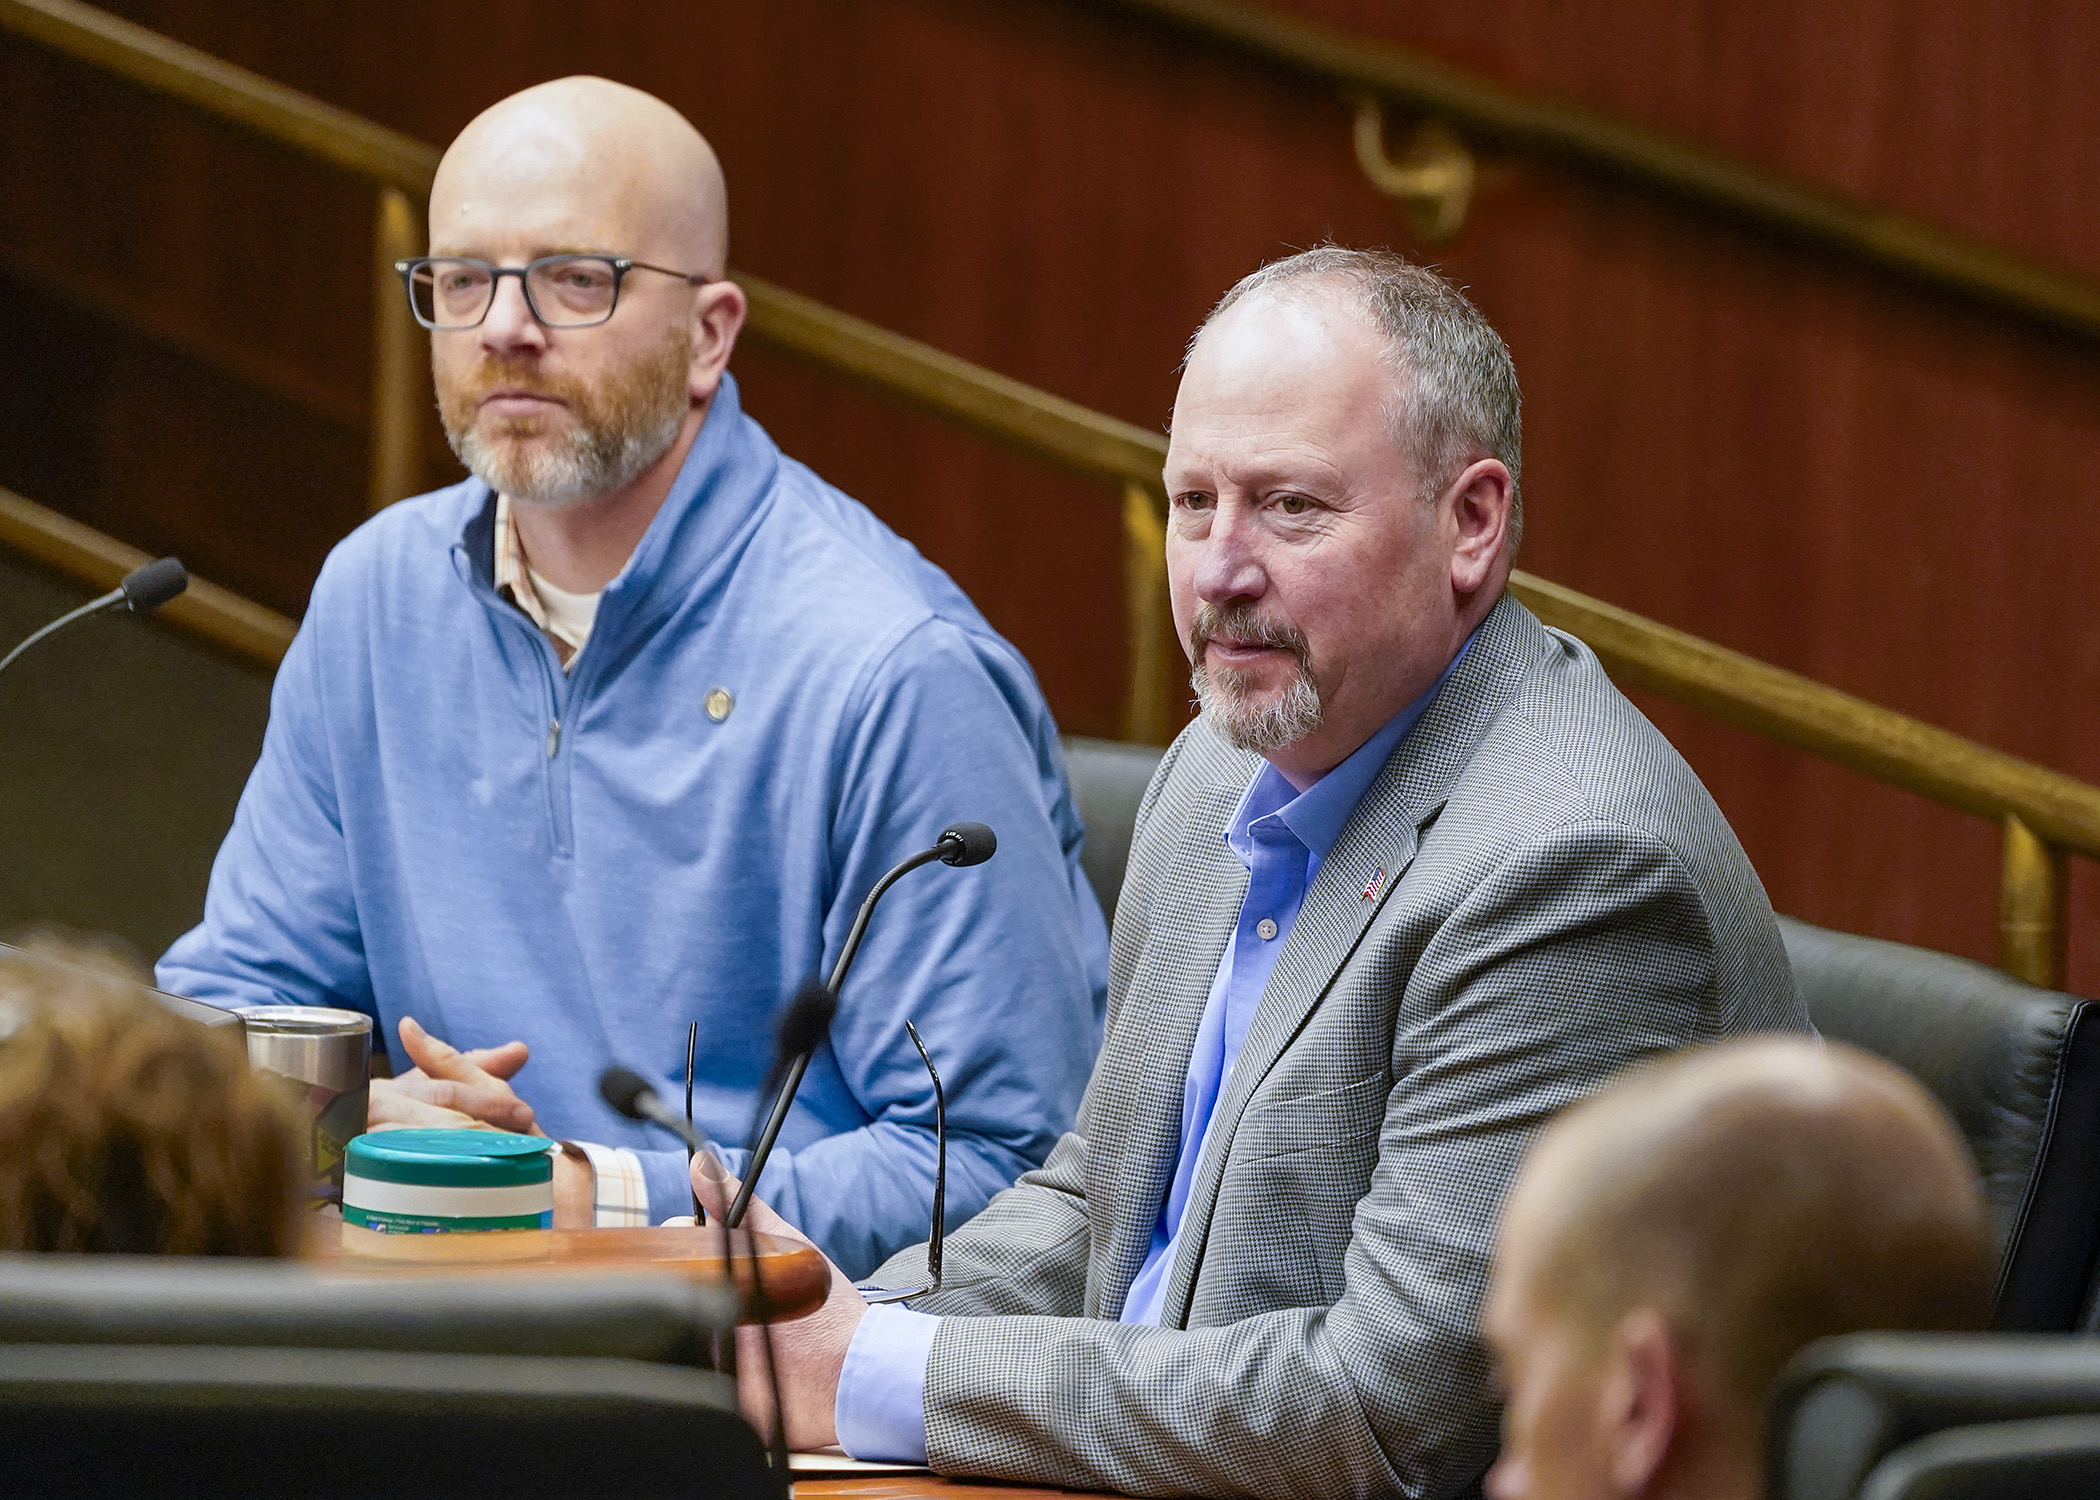 Dave Wager, executive director of the Minnesota Propane Association, testifies before the House Transportation Finance and Policy Committee in support of a bill sponsored by Rep. Brad Tabke, left, that would amend petroleum product transporting requirements. (Photo by Andrew VonBank)